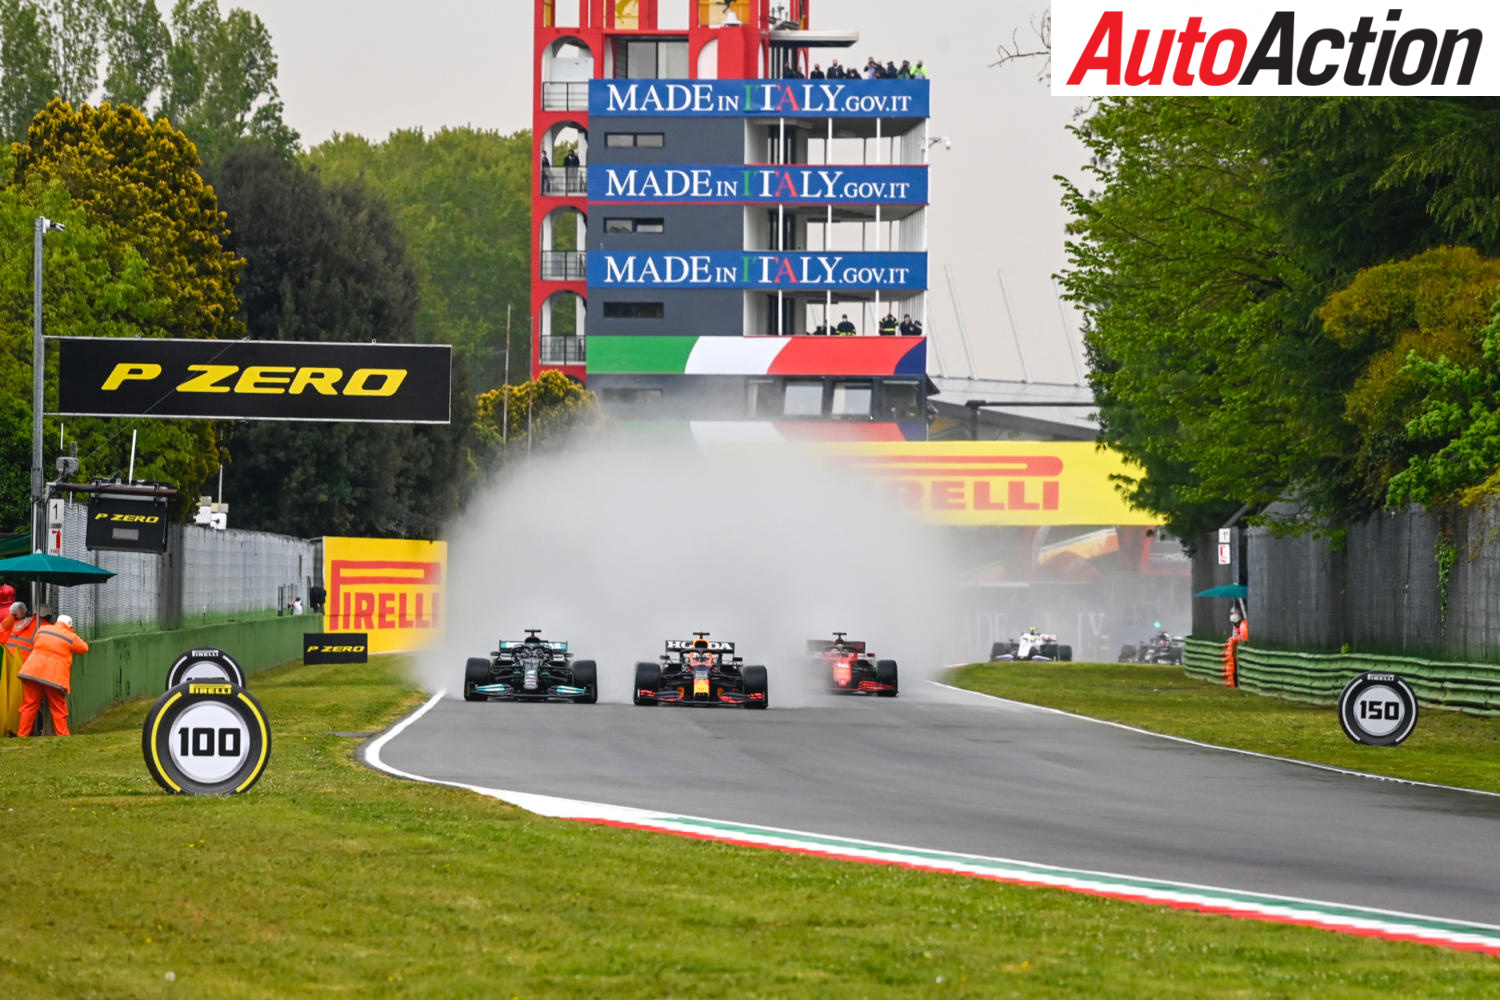 IMOLA SIGNS MULTI-YEAR F1 DEAL